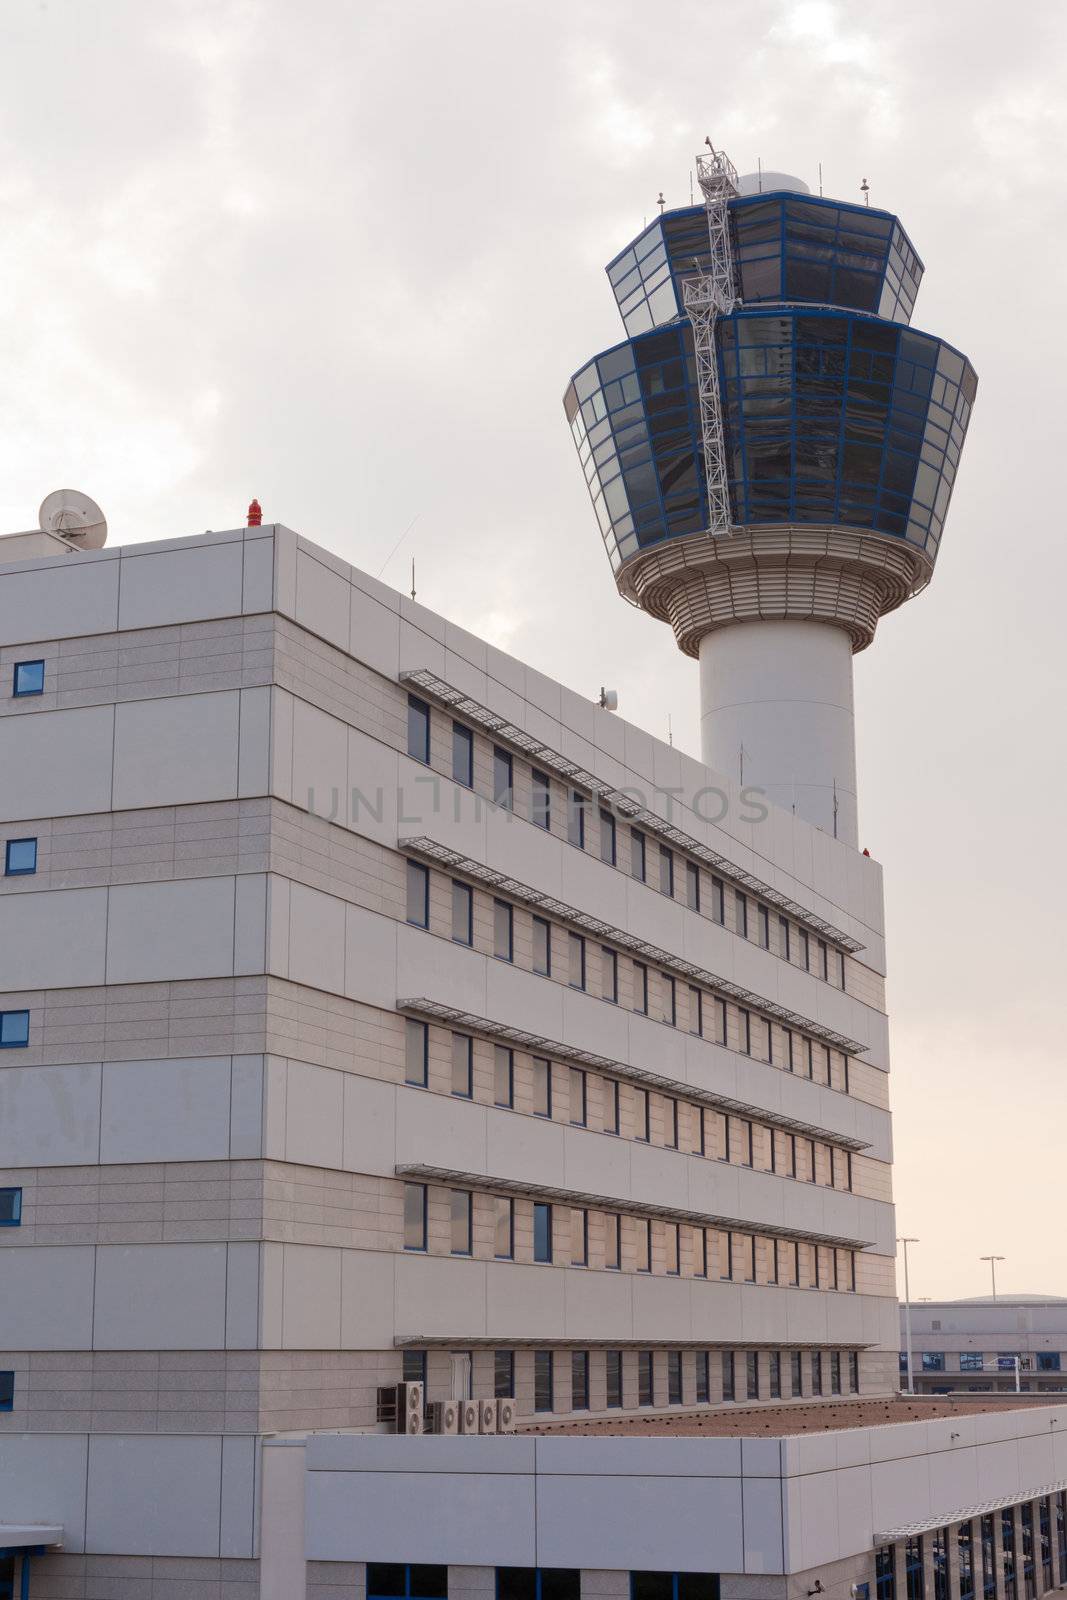 Airport control tower and administrative building in Athens, Greece.